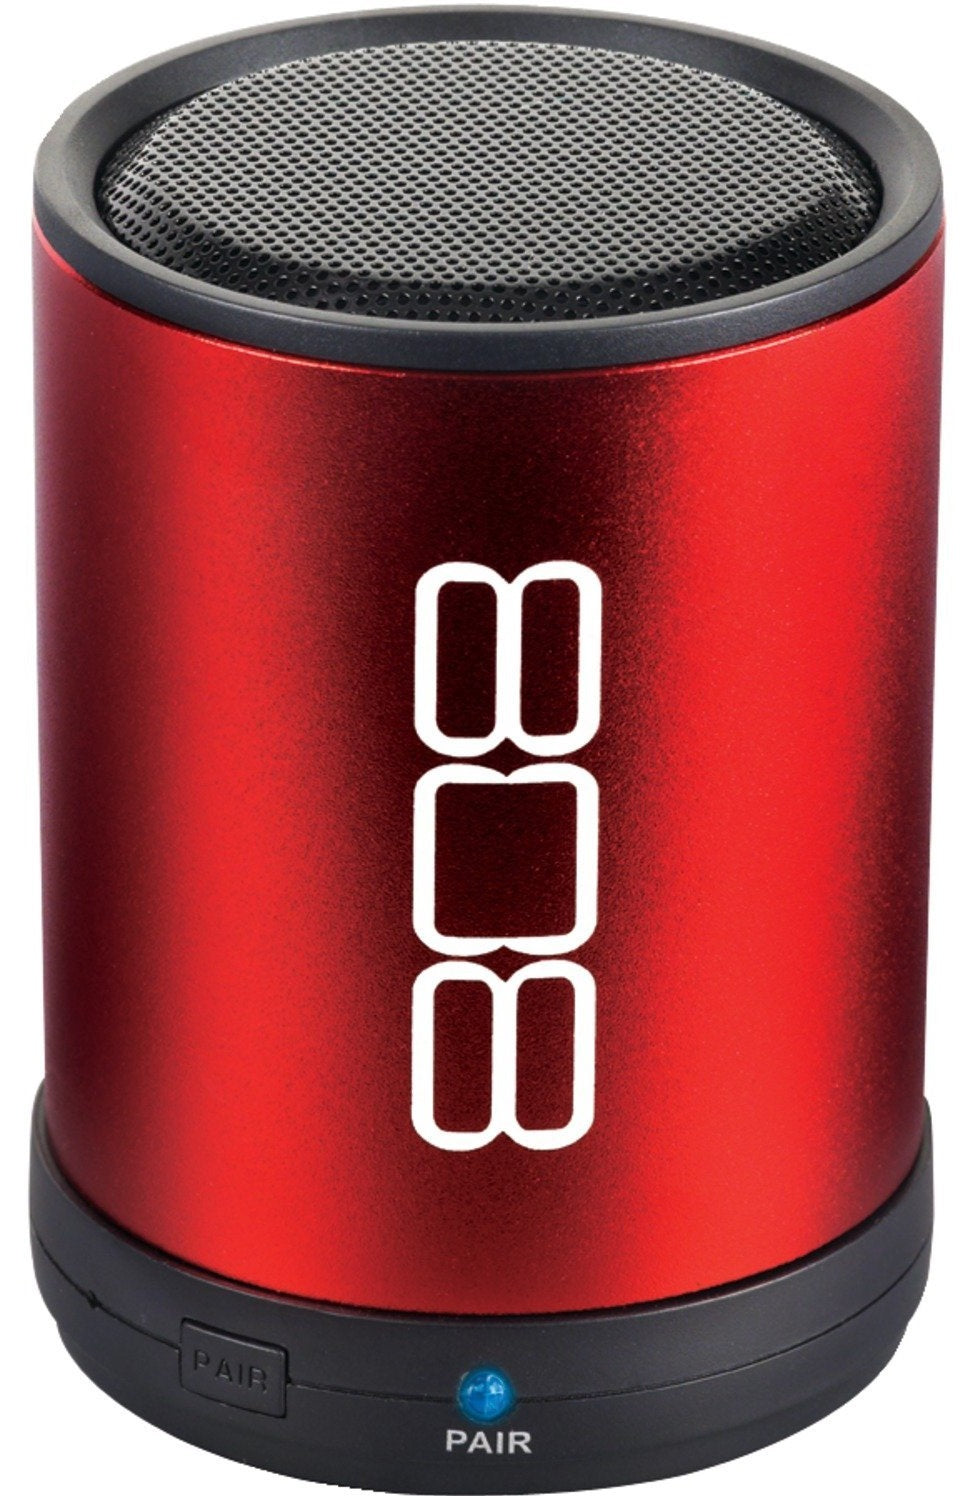 Buy audiovox bluetooth speaker - Online store for electrical supplies, audio accessories in USA, on sale, low price, discount deals, coupon code